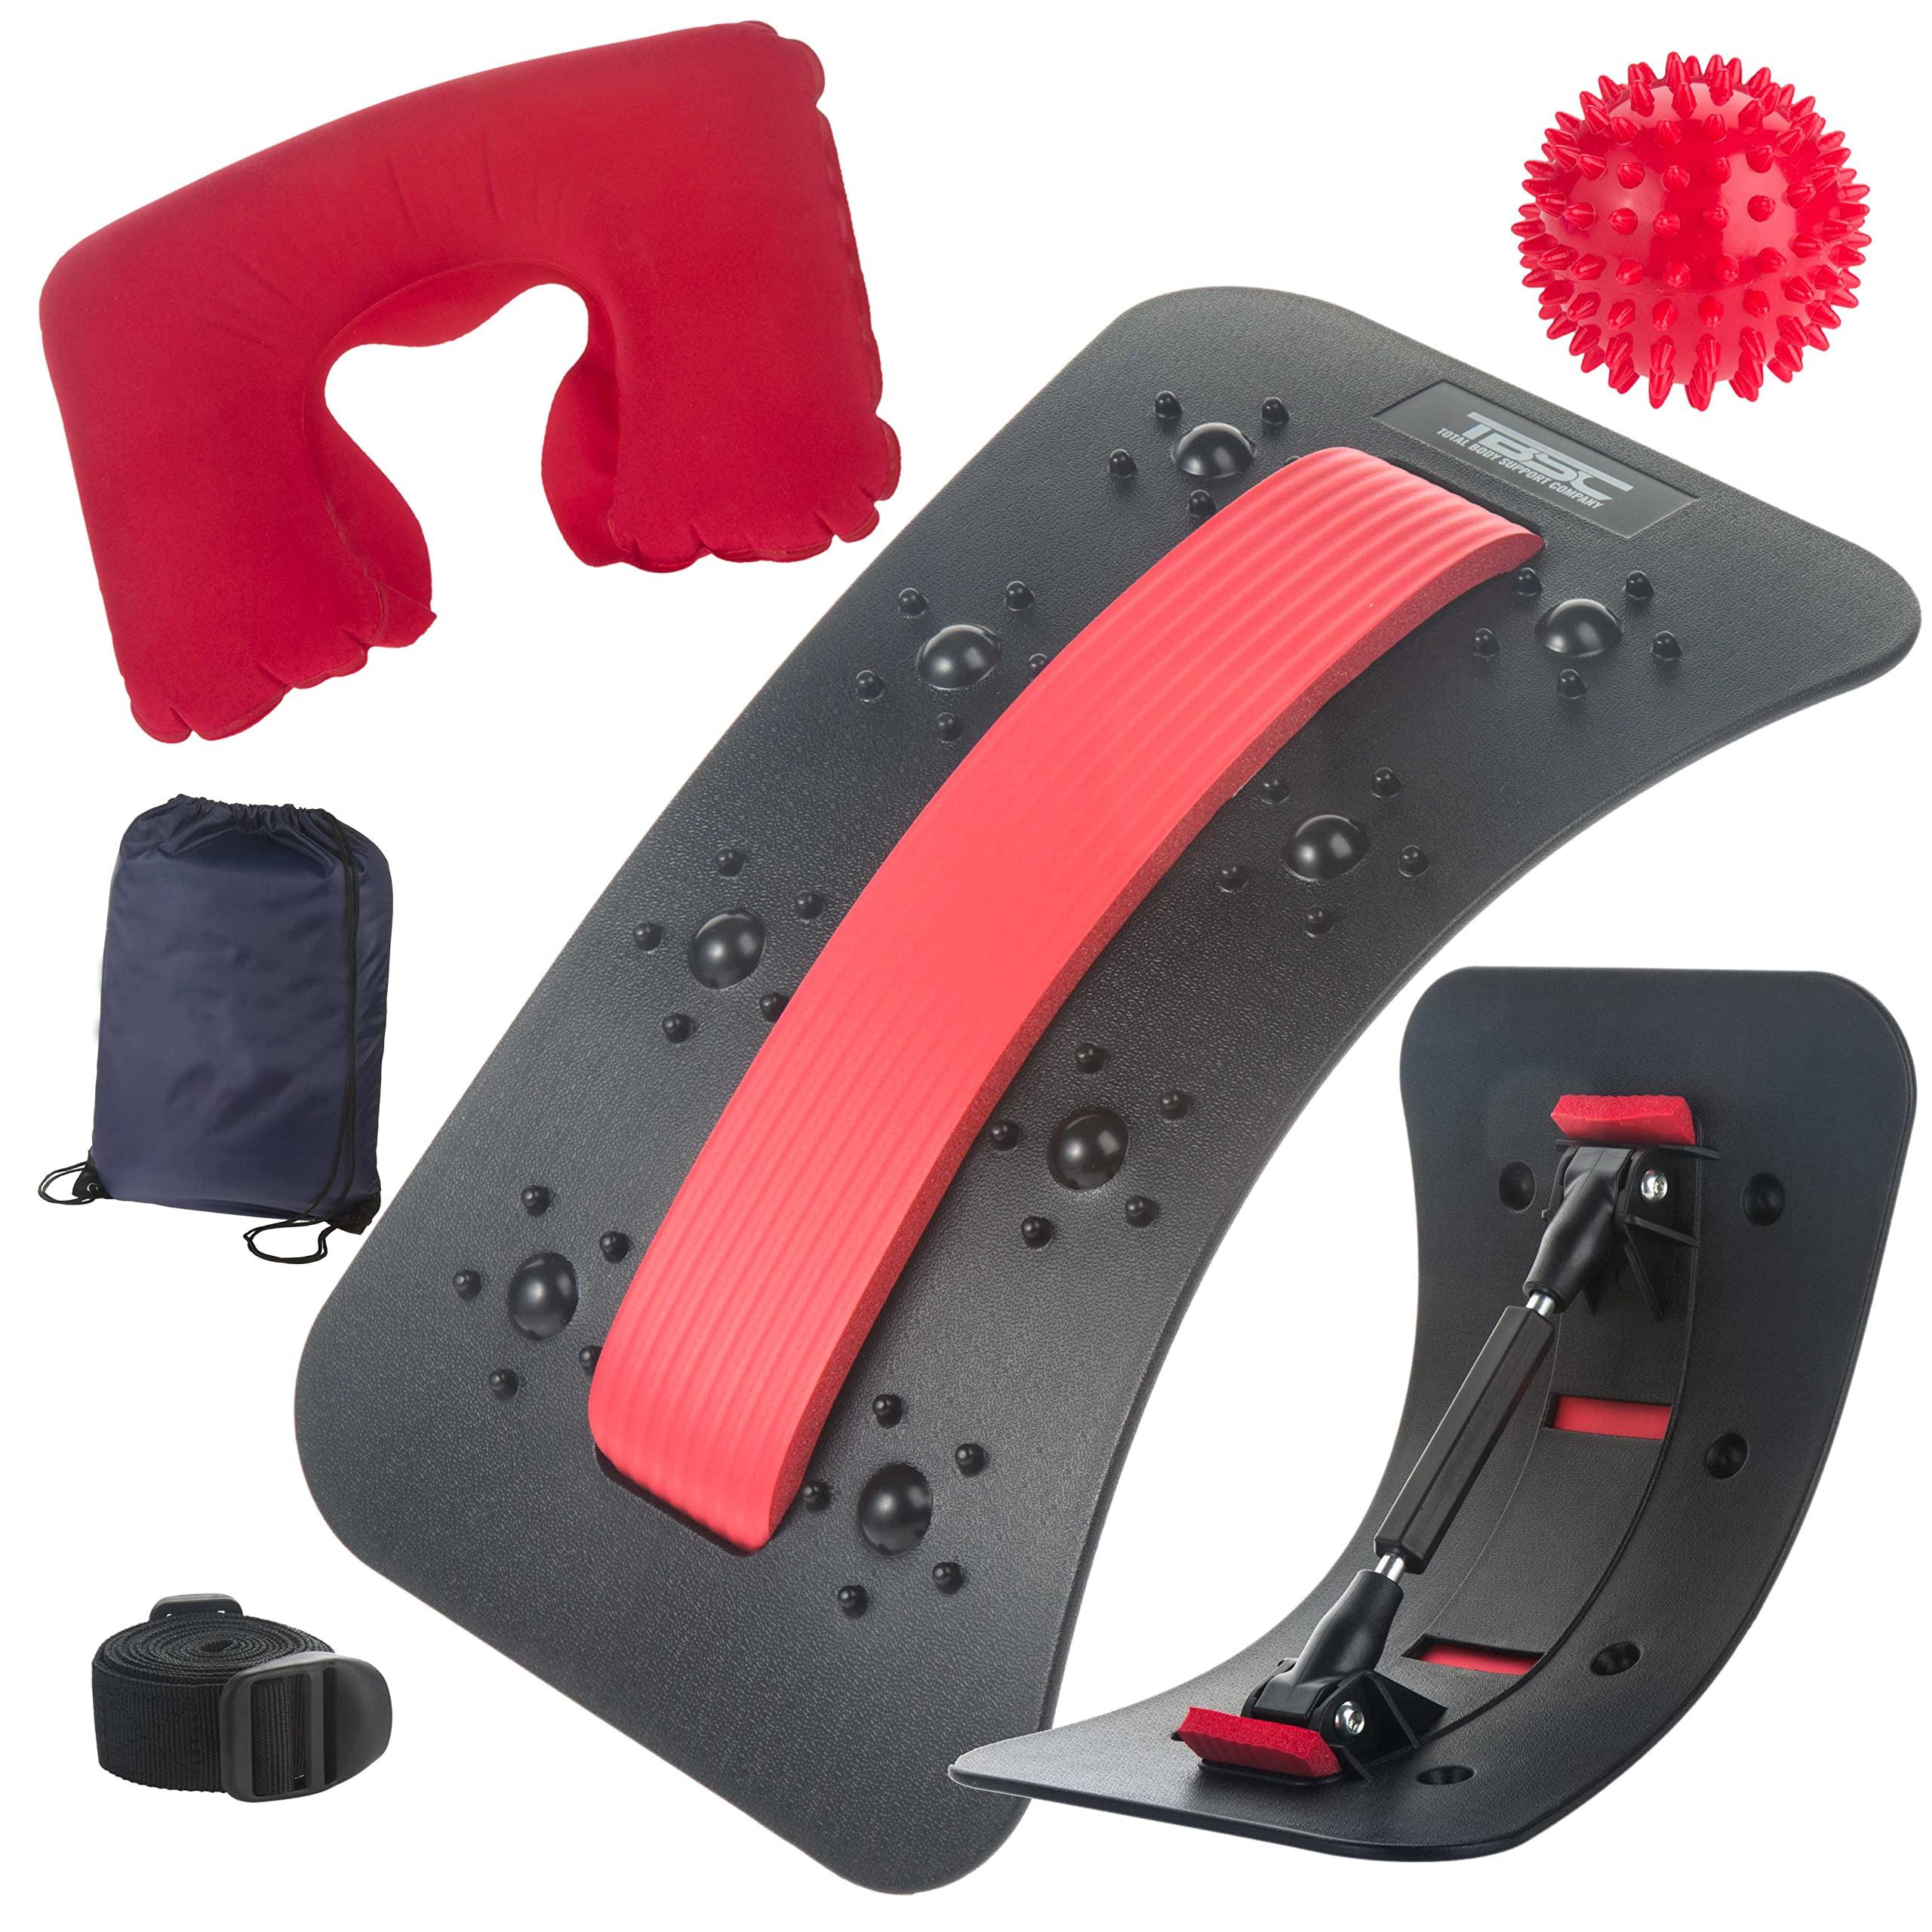 Inflatable Lumbar Support Massage Pillows - for Back Pain Relief